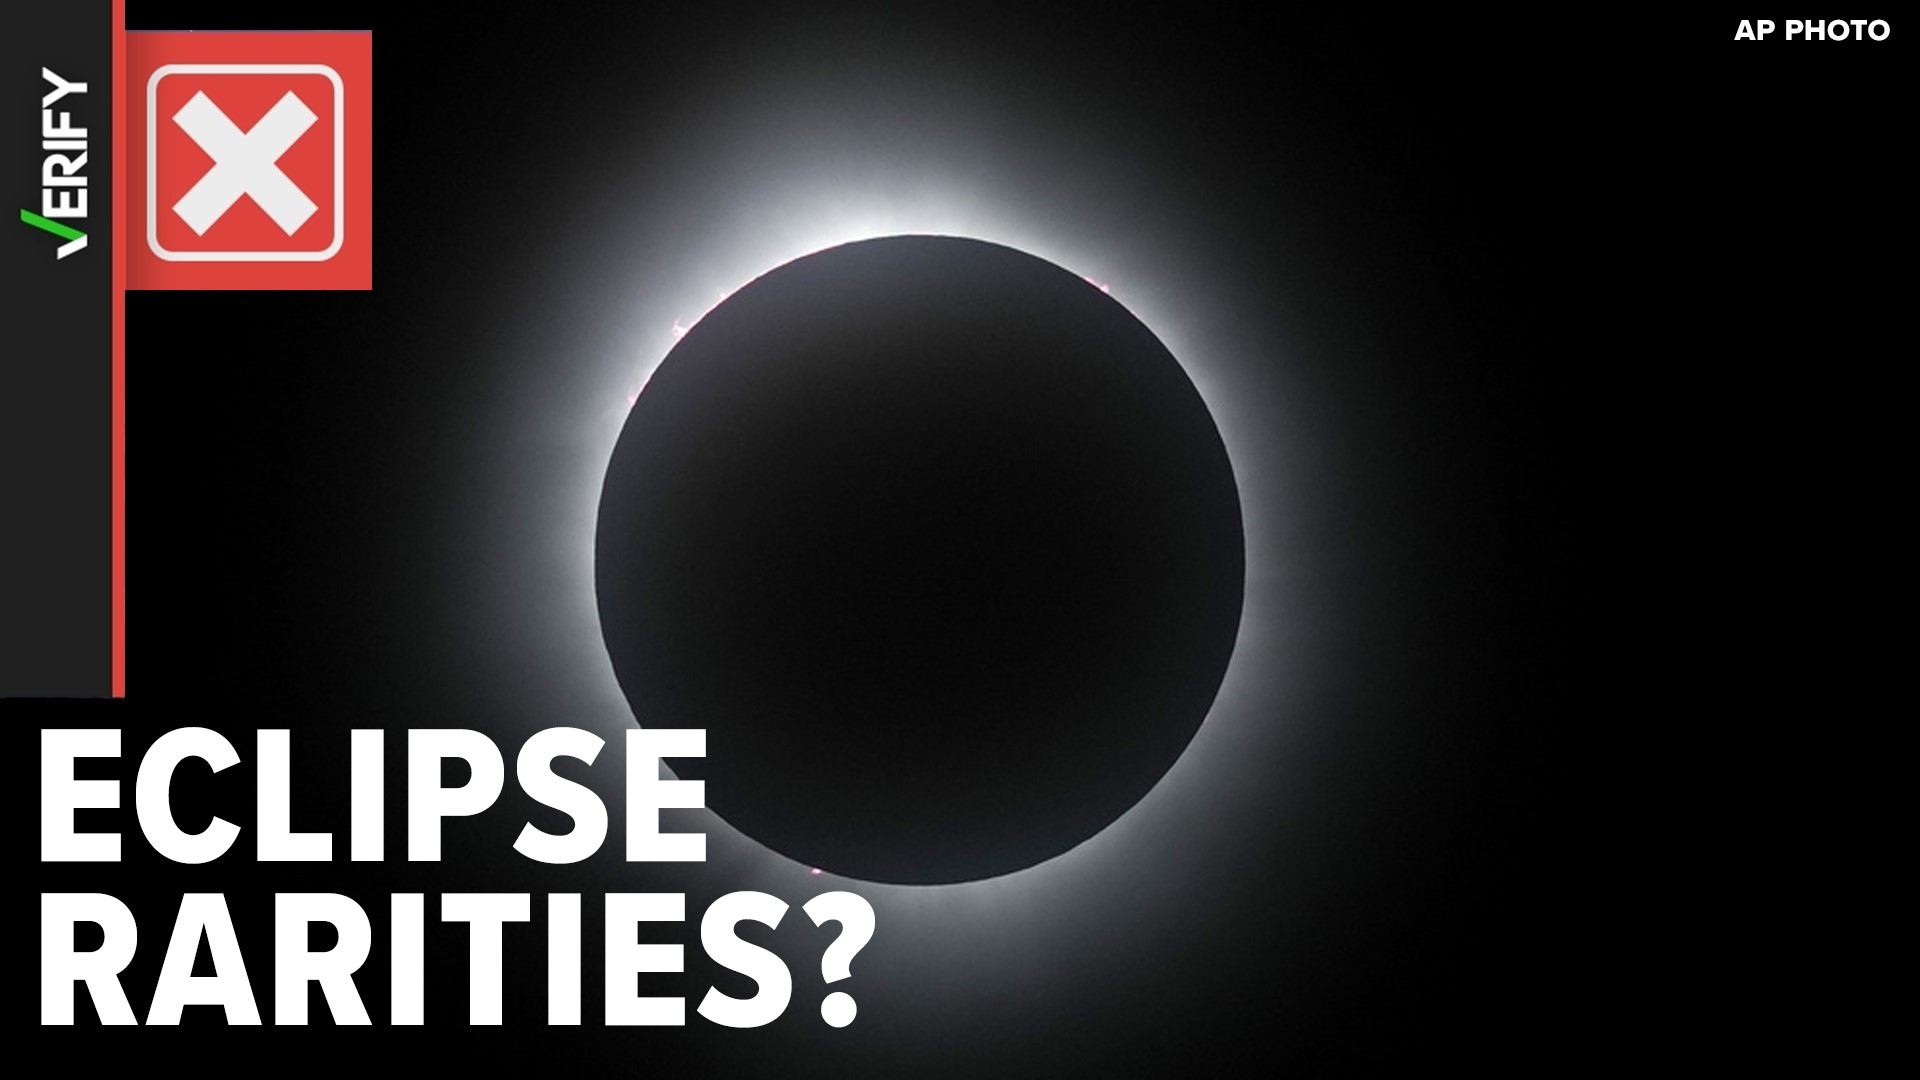 You may have heard people calling eclipses 'rare.' NASA and NOAA help show us why that's technically incorrect.